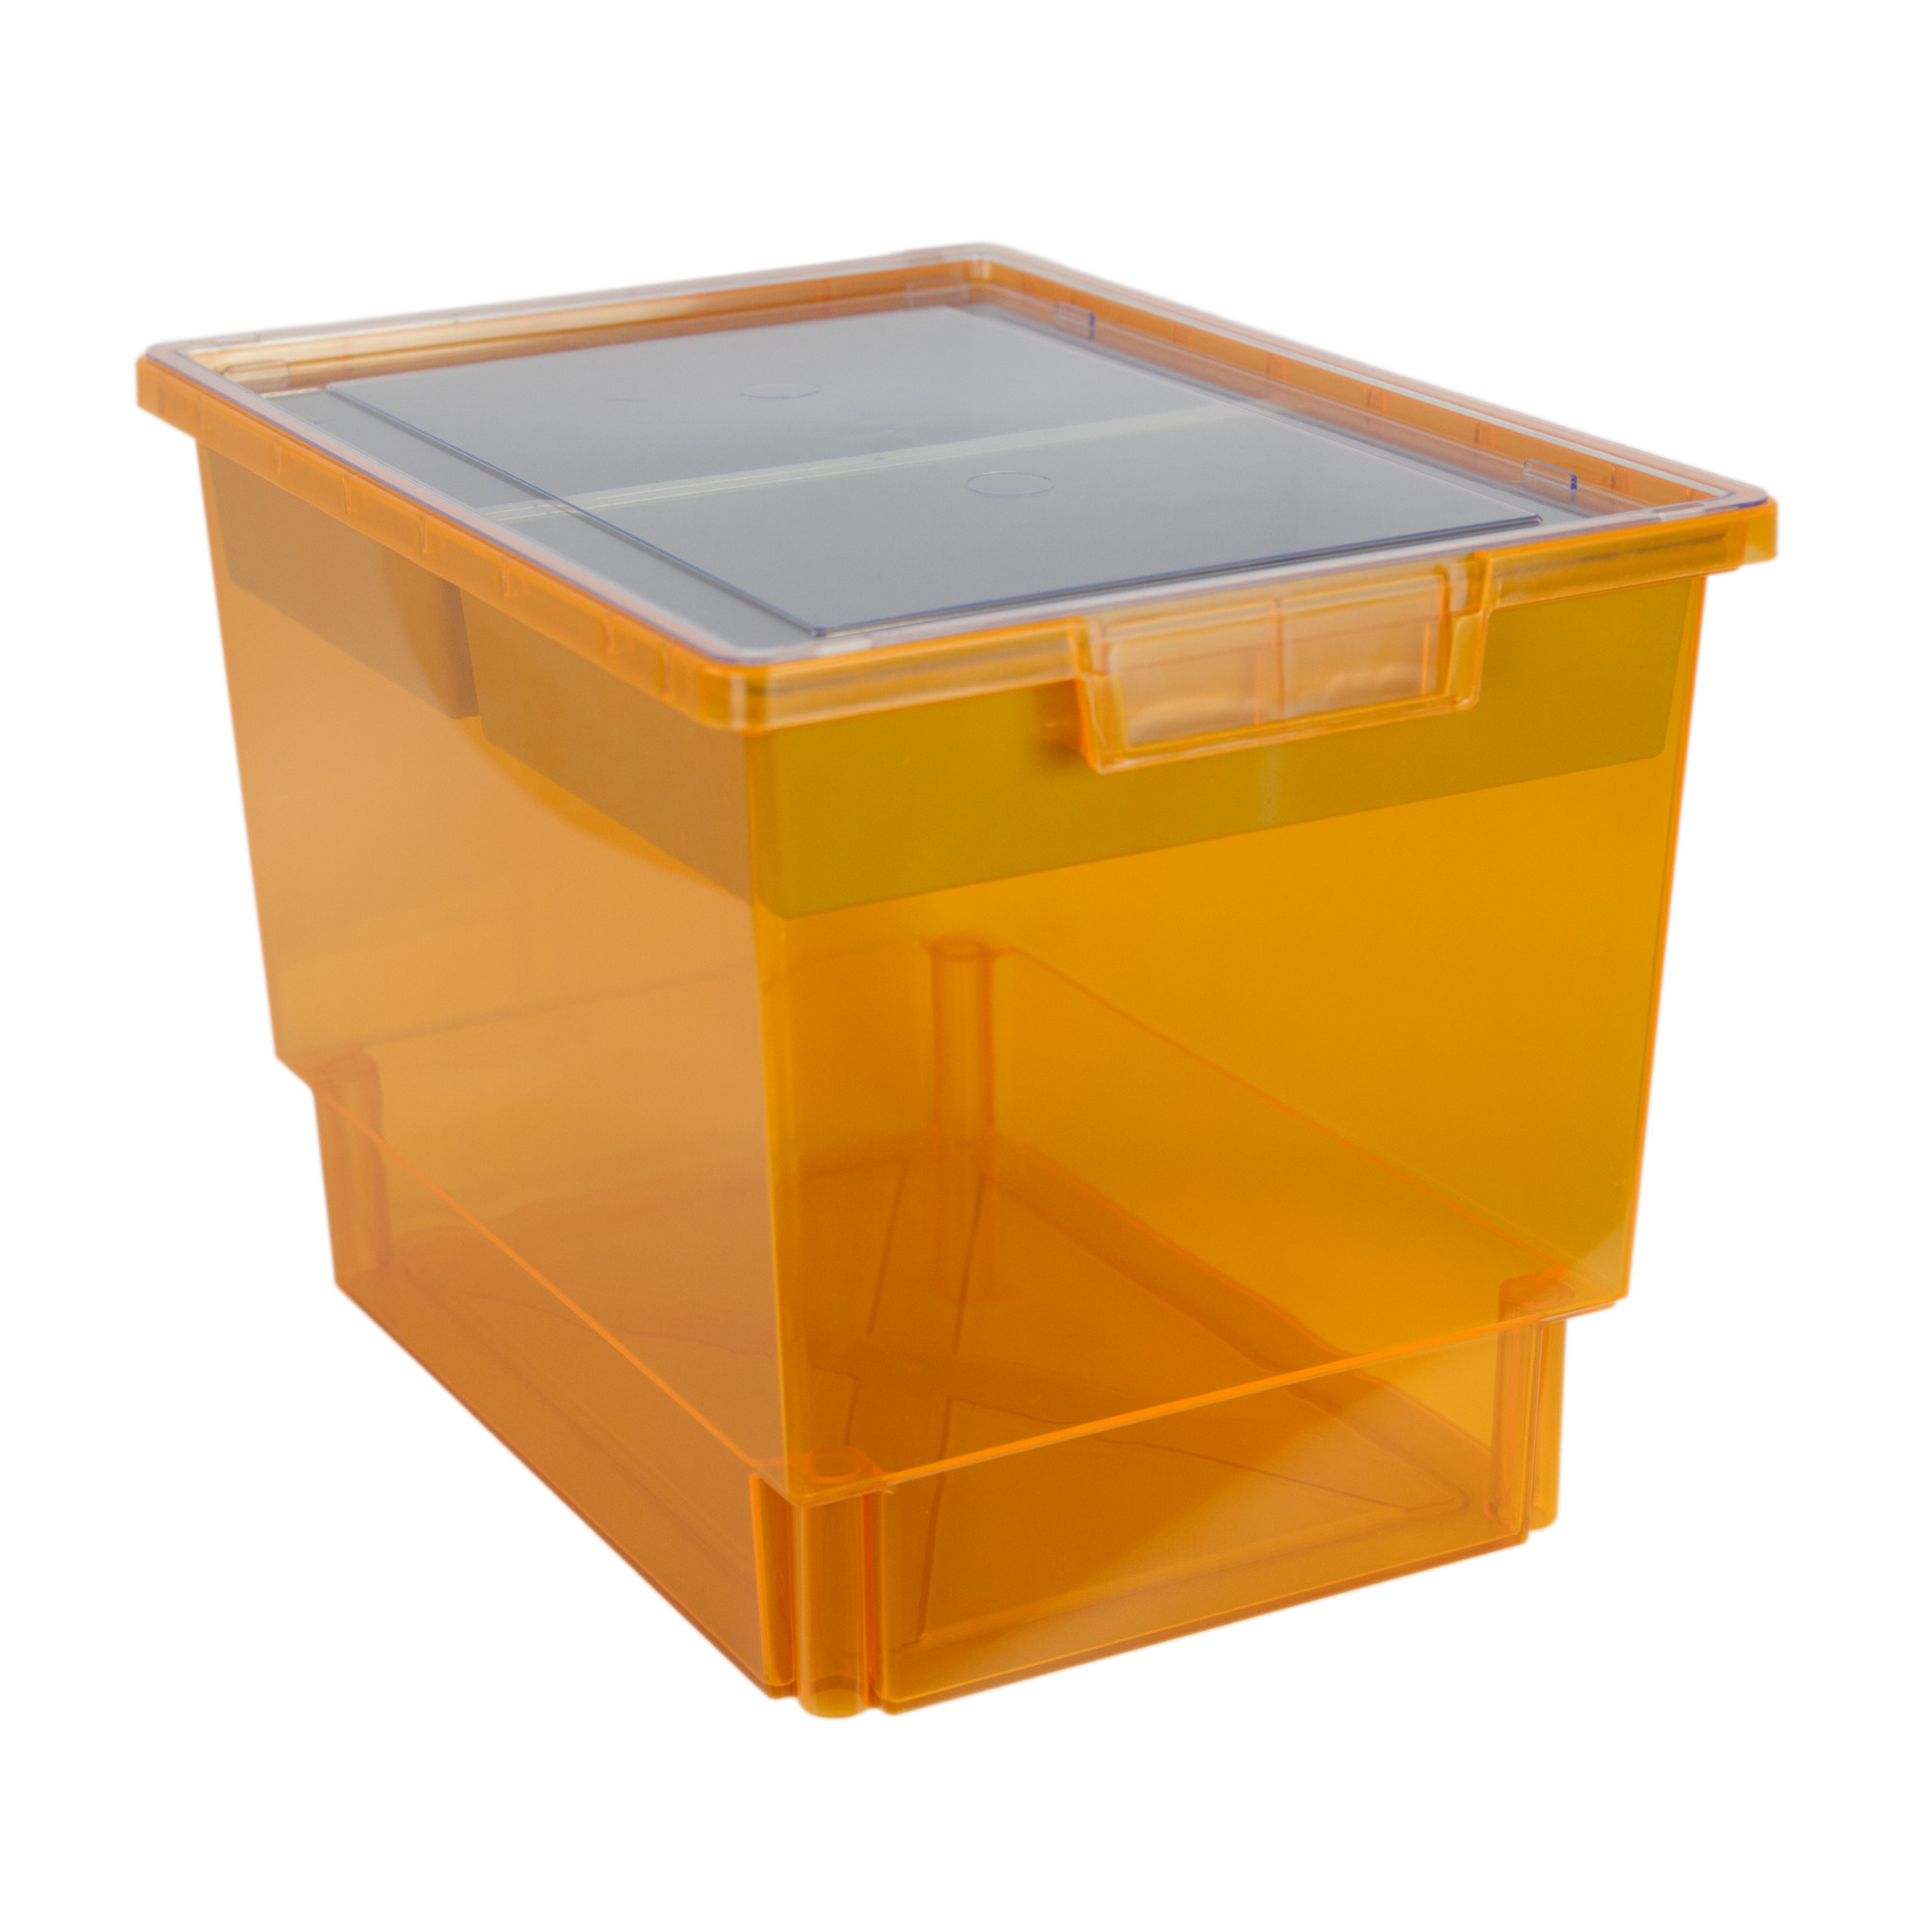 Certwood StorWerks, Slim Line 12Inch Tray Kit (2 x Divisions) Orange-3PK, Included (qty.) 3, Material Plastic, Height 9 in, Model CE1954FO-NK0404-3